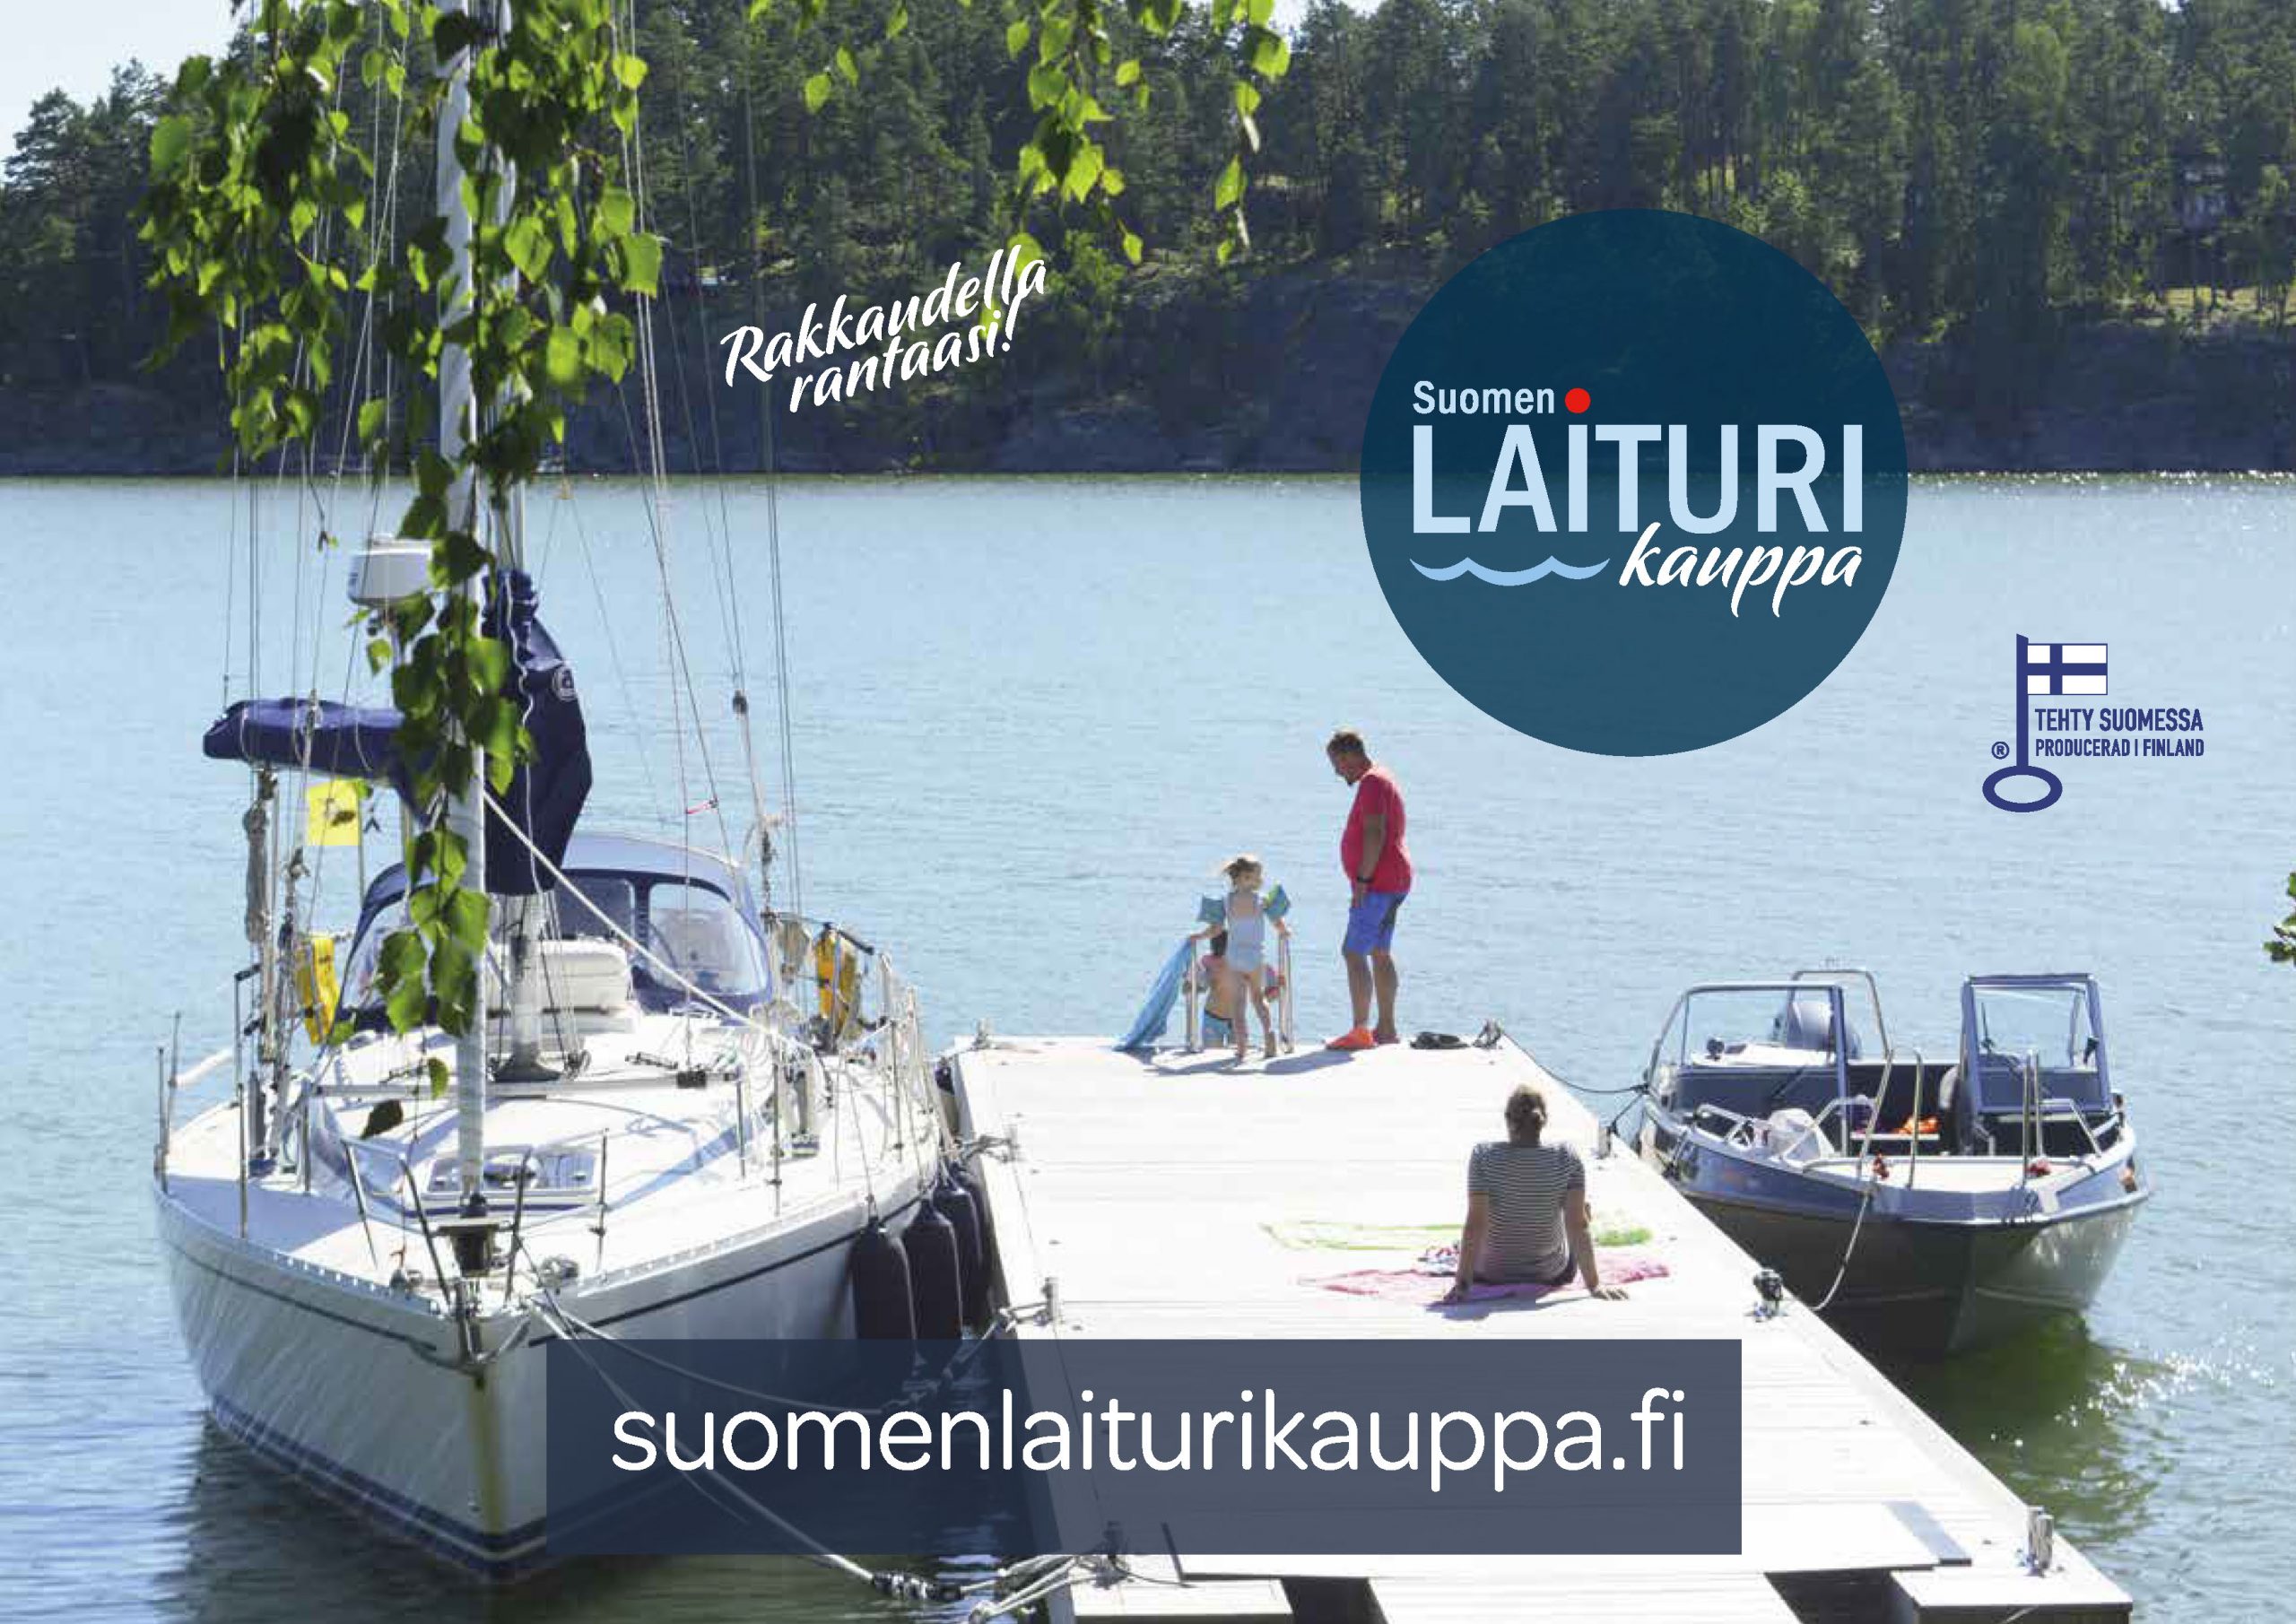 Have a look at our brochure - Suomen Laiturikauppa Oy